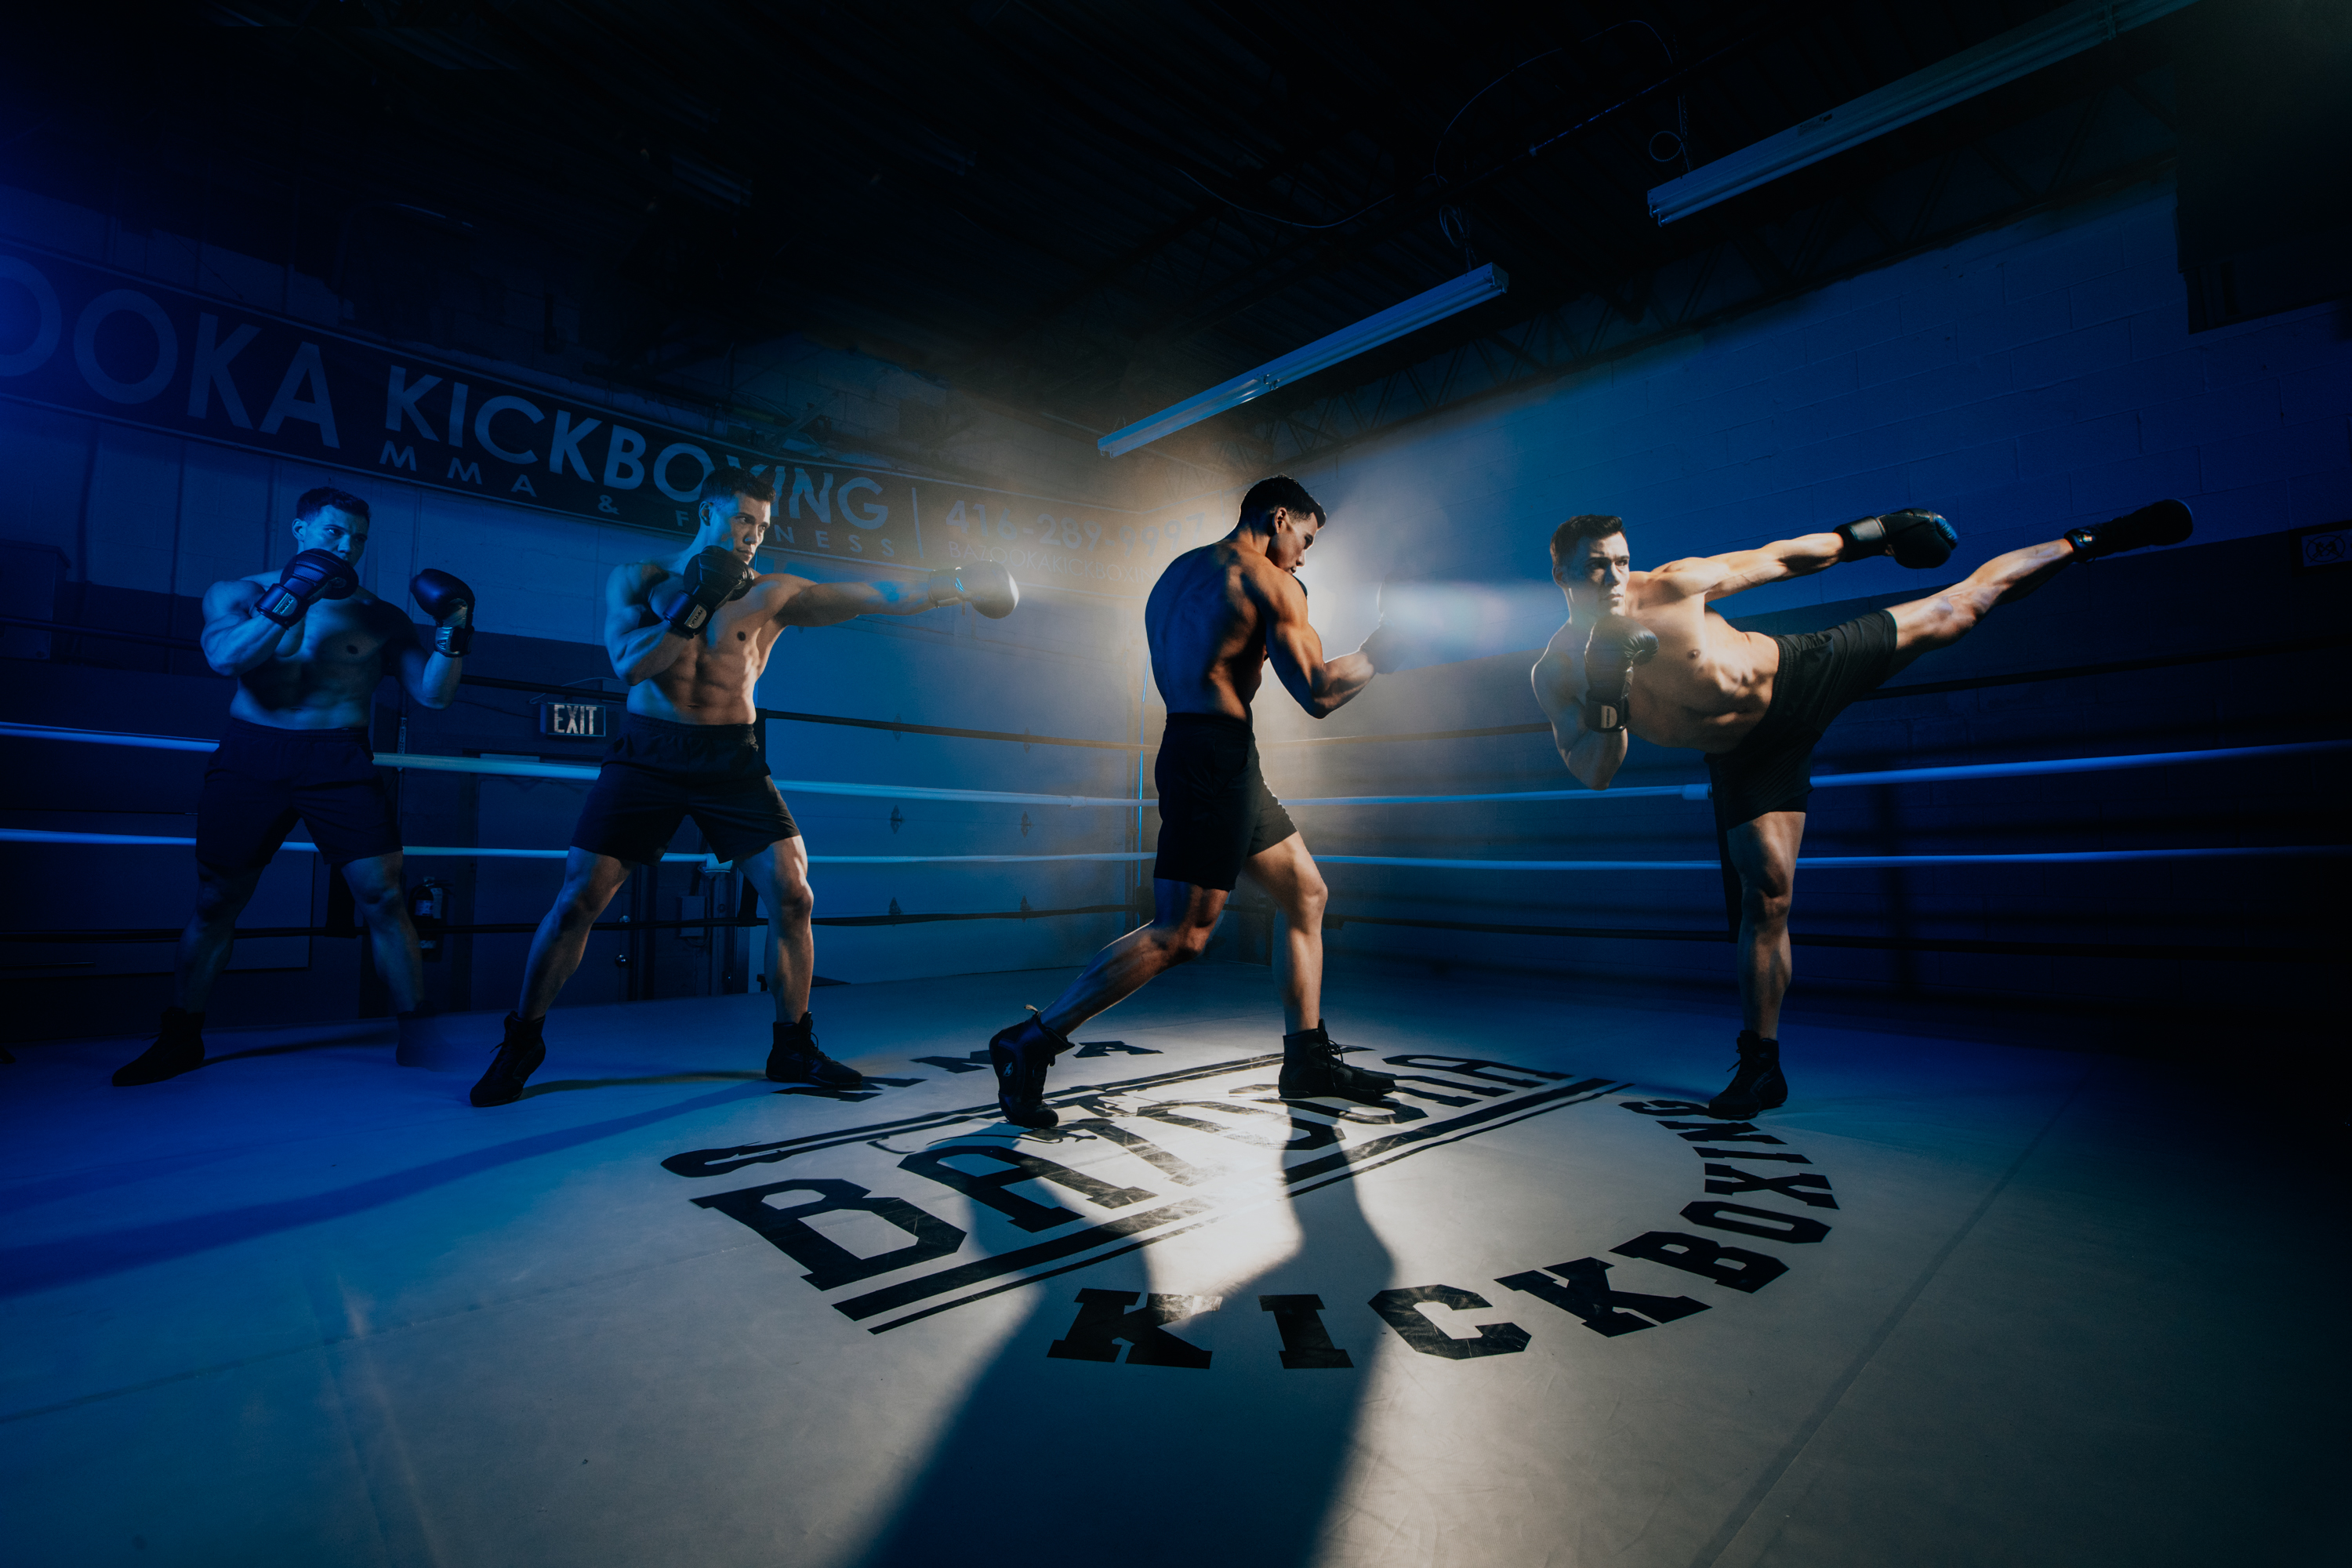 Download Intense Kickboxing Sparring Session Among Two Female Athletes.  Wallpaper | Wallpapers.com